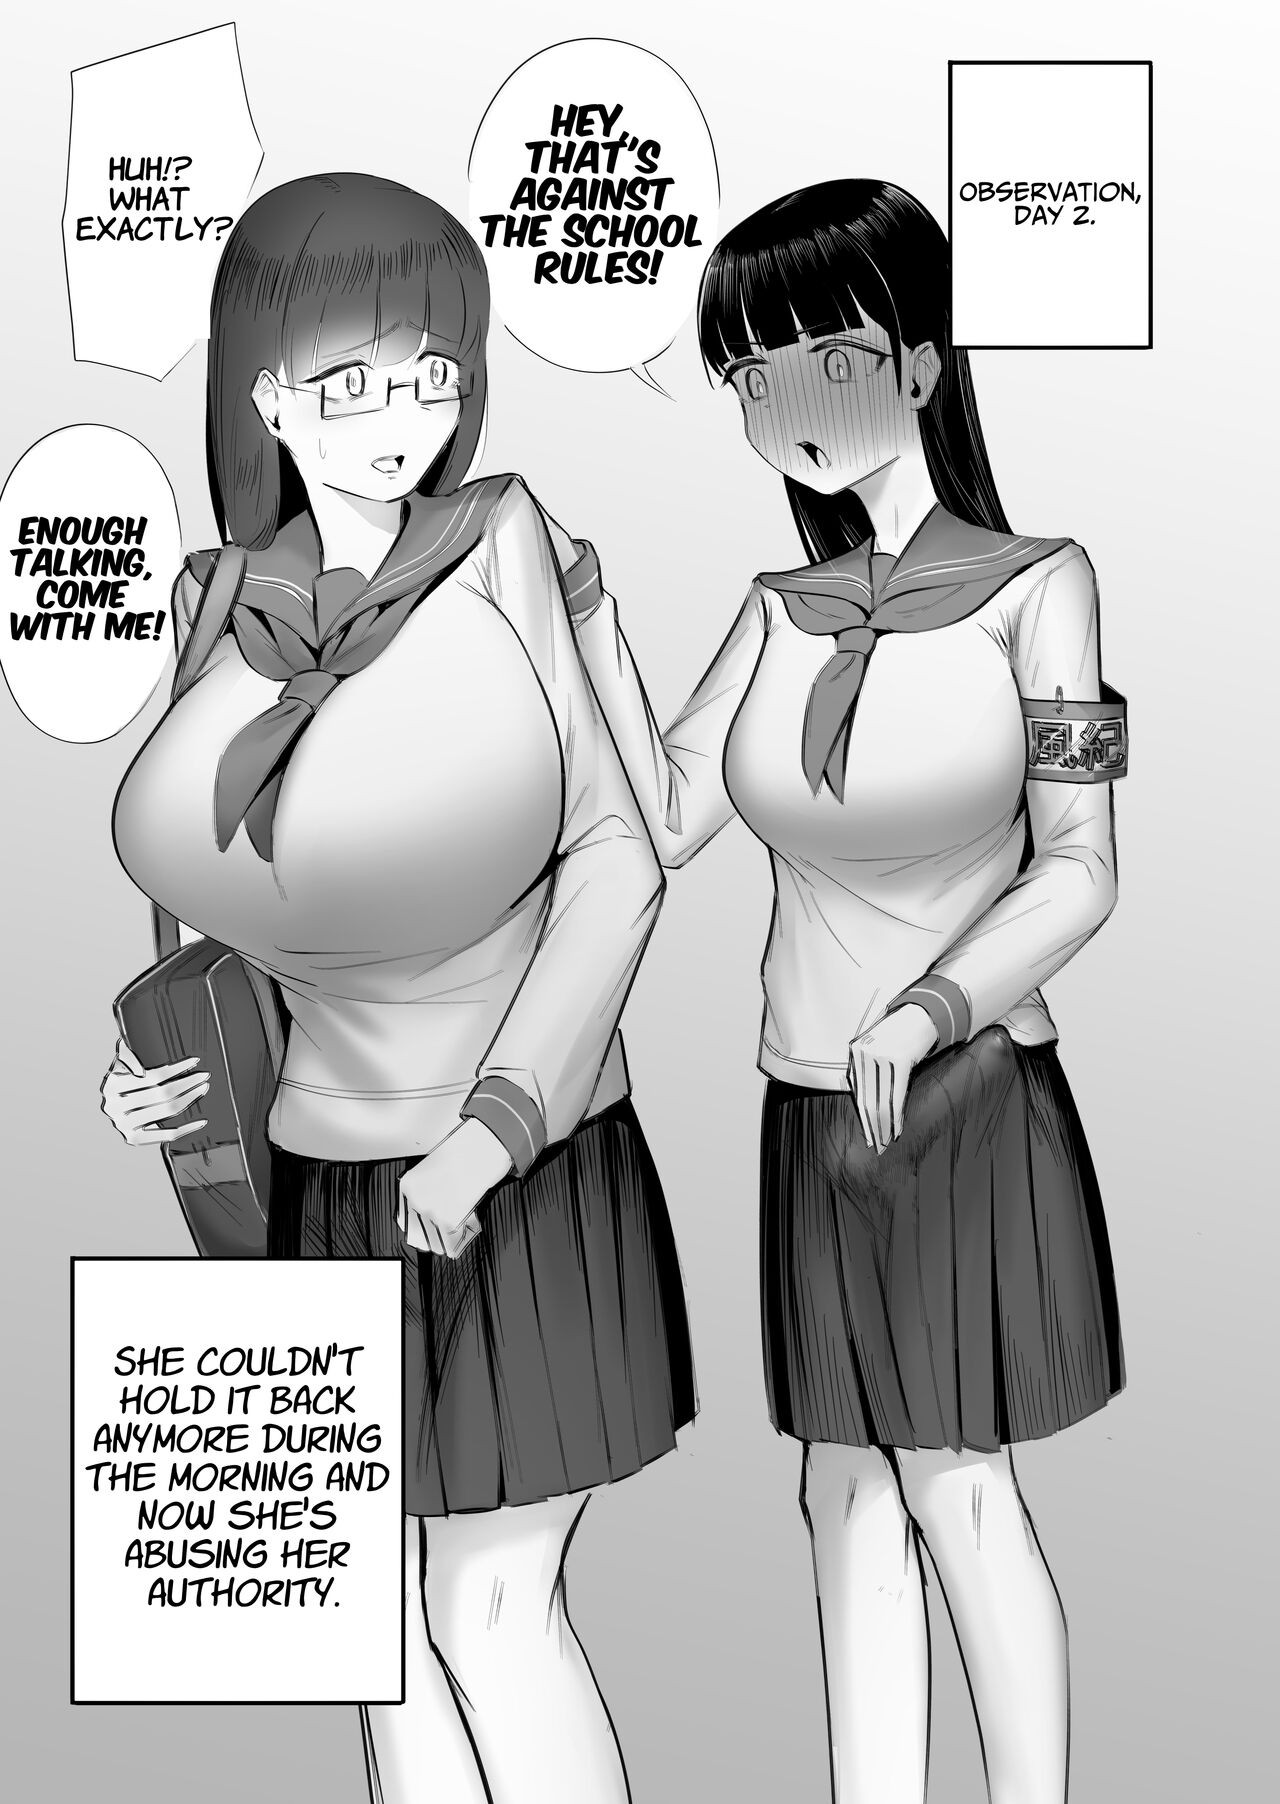 Enough Girls For Days - The Story Of How Everything Went To Hell After I Gave A Cock To A Nice And  Innocent Girl Porn Comic english 08 - Porn Comic